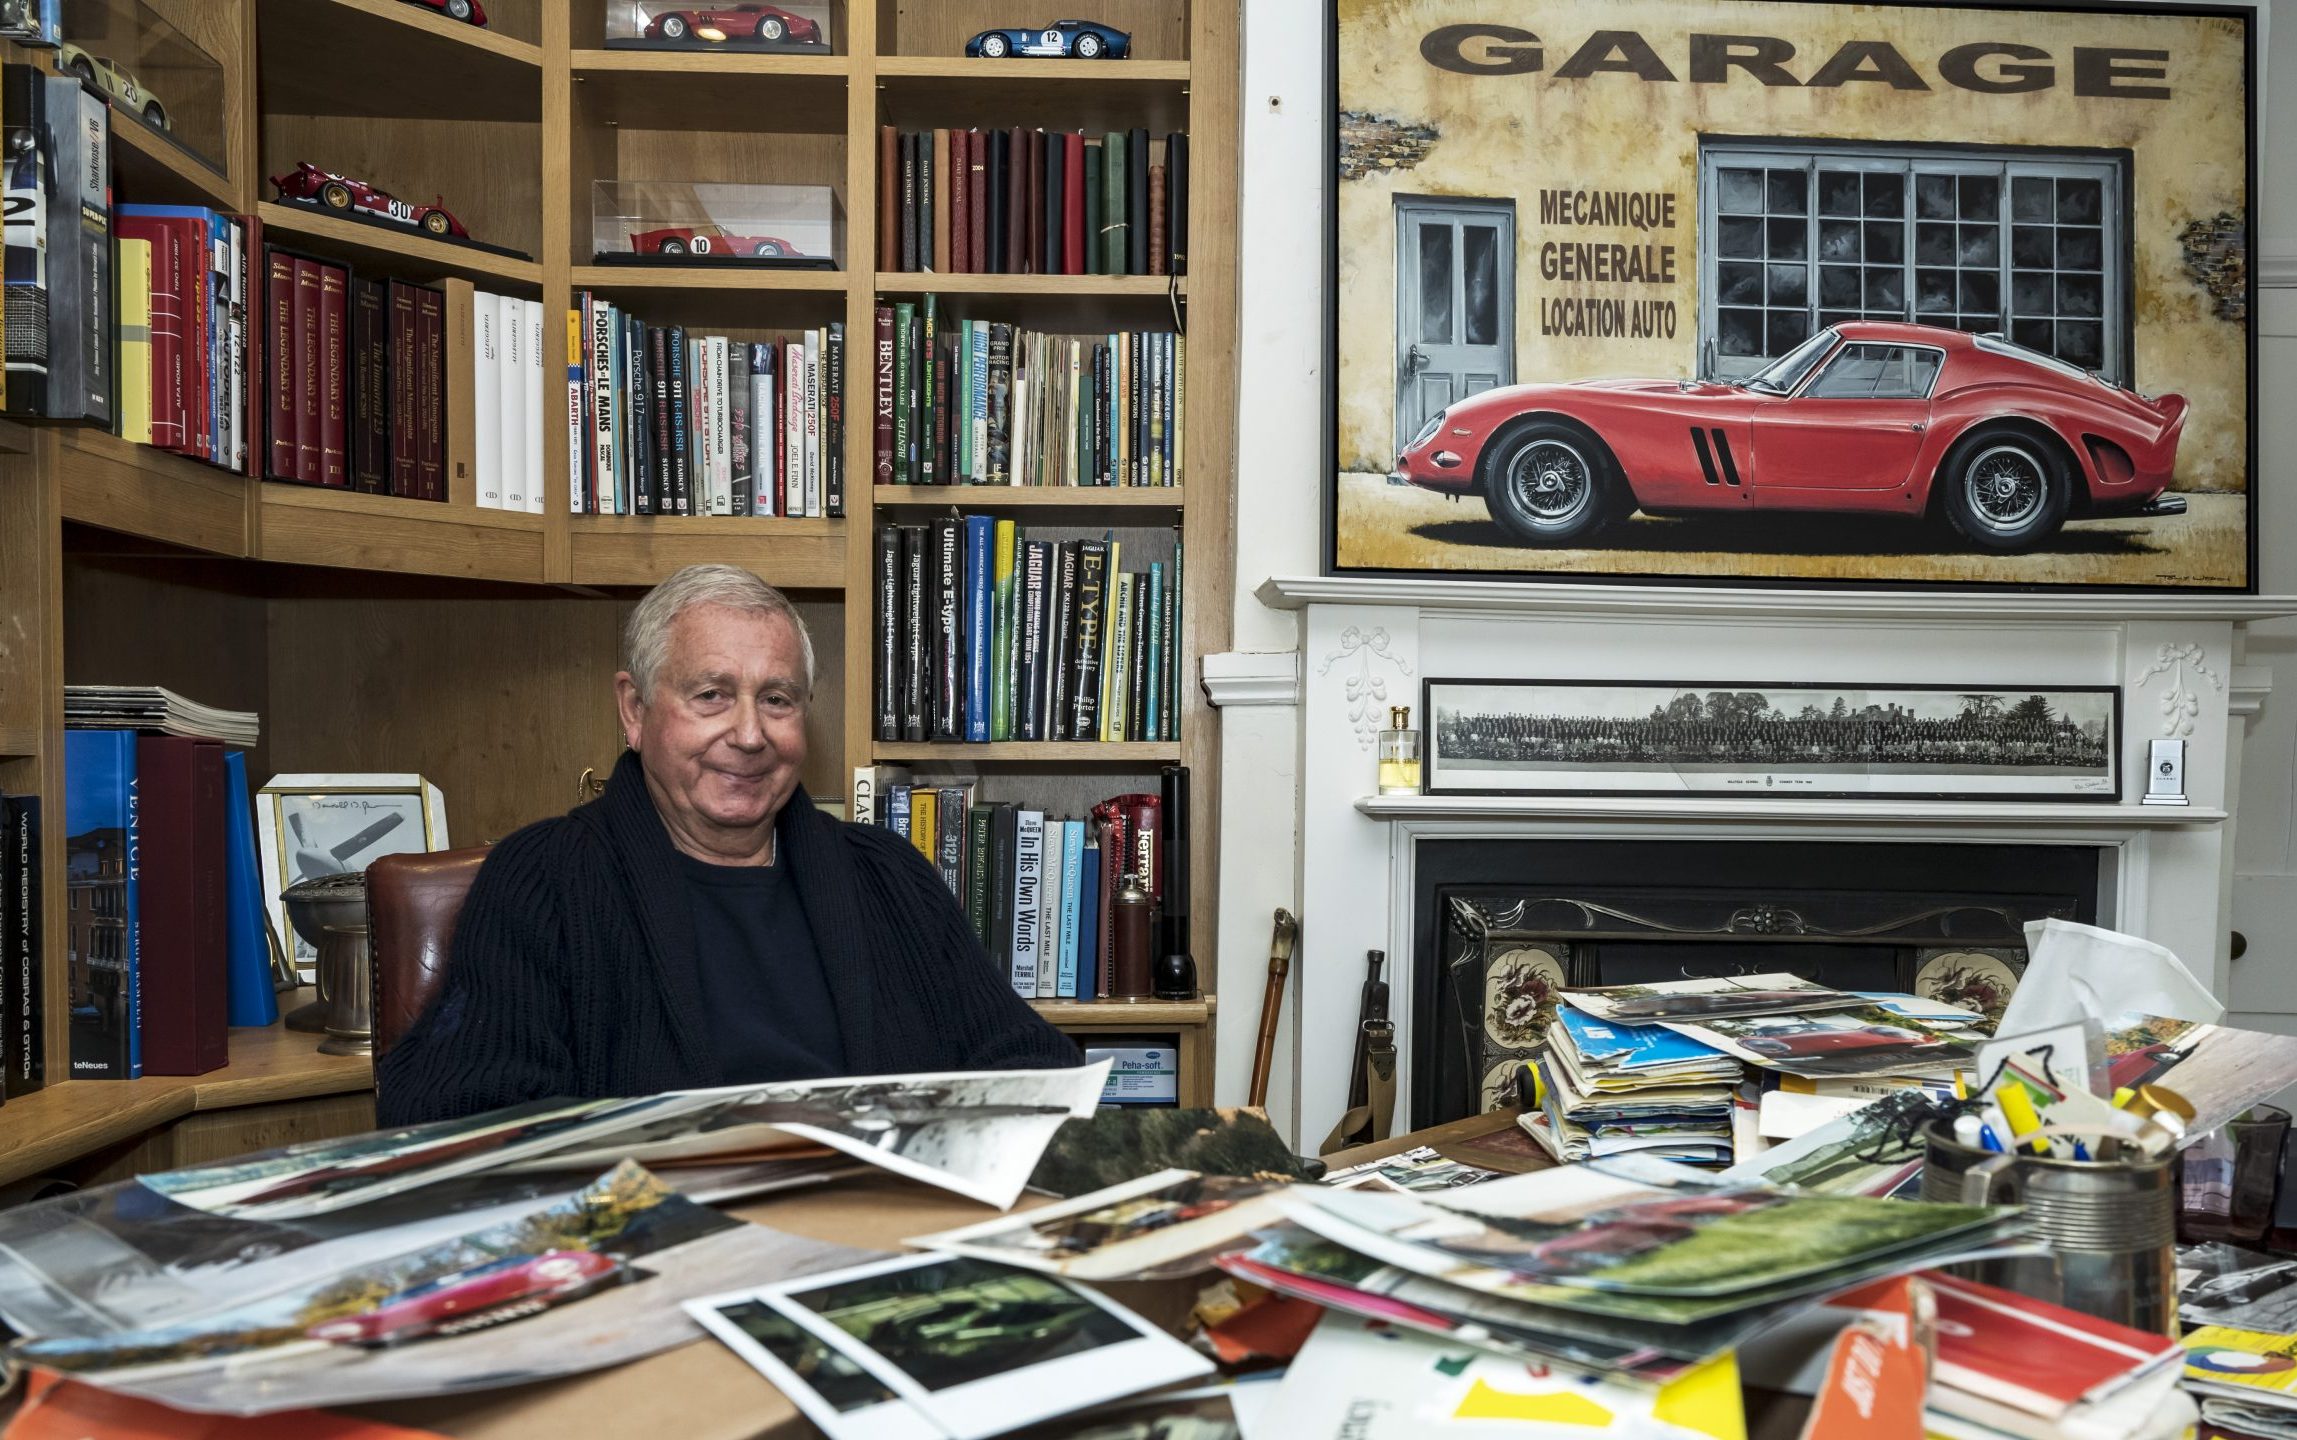 Wheeling and dealing in the fastlane: ‘You couldn’t sell a Ferrari 250 GTO because it was too slow to win races’